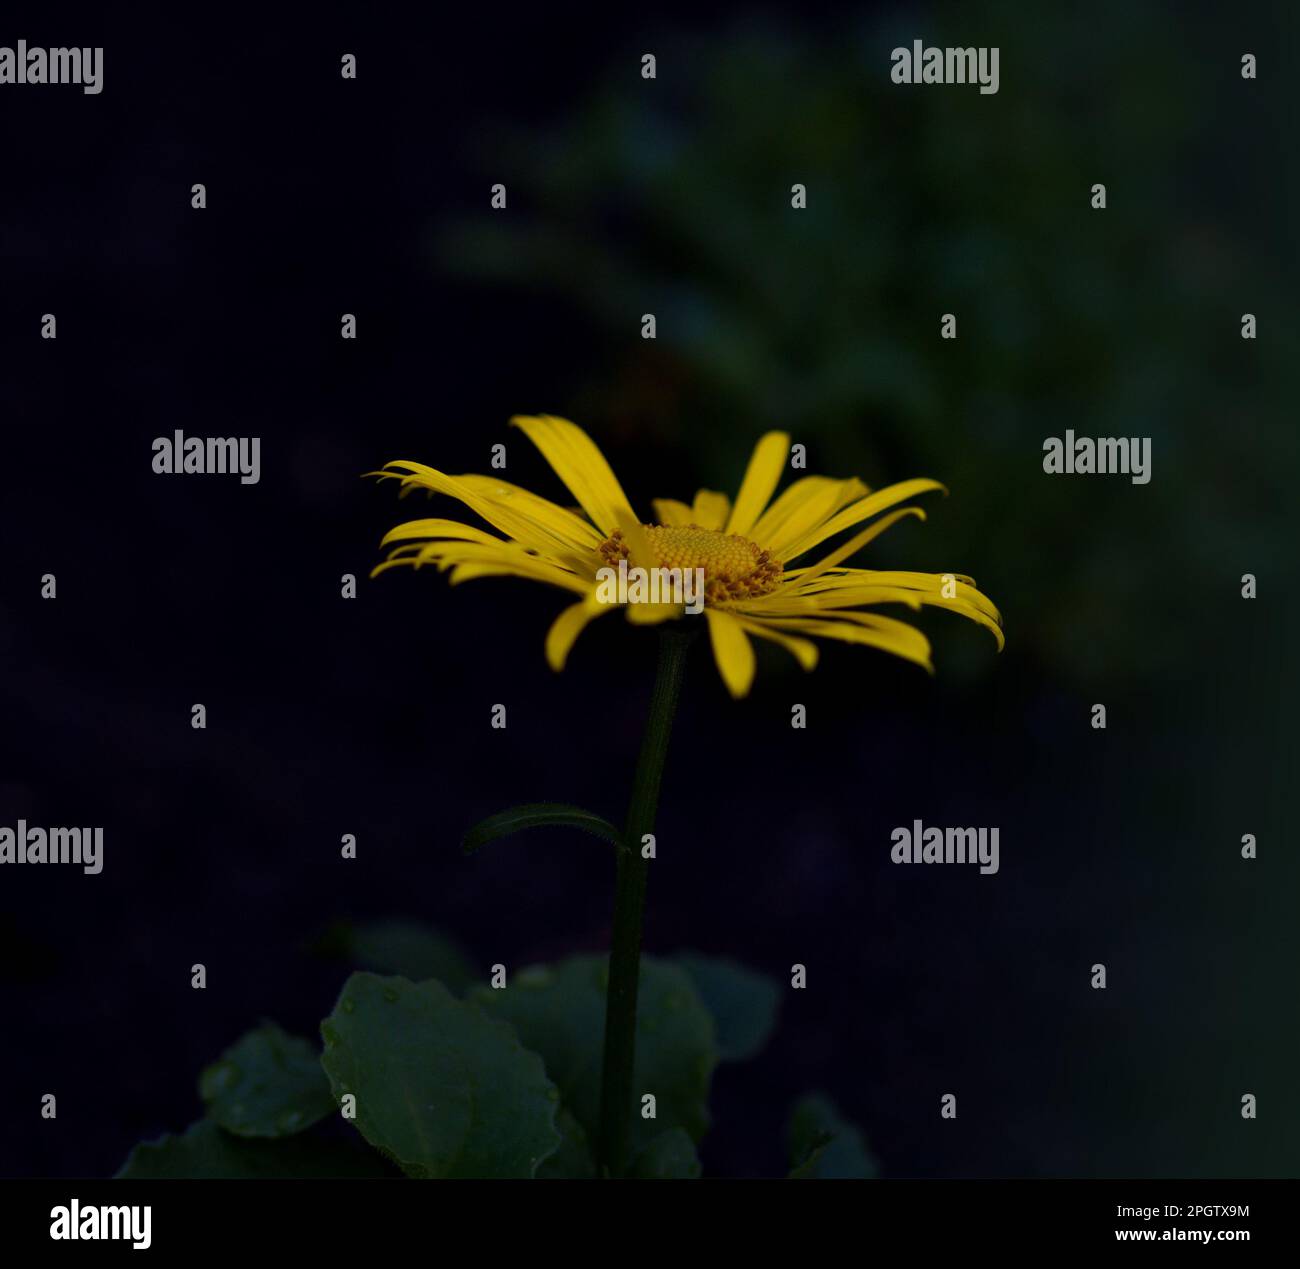 Yellow blooming blossom in the darkness Stock Photo